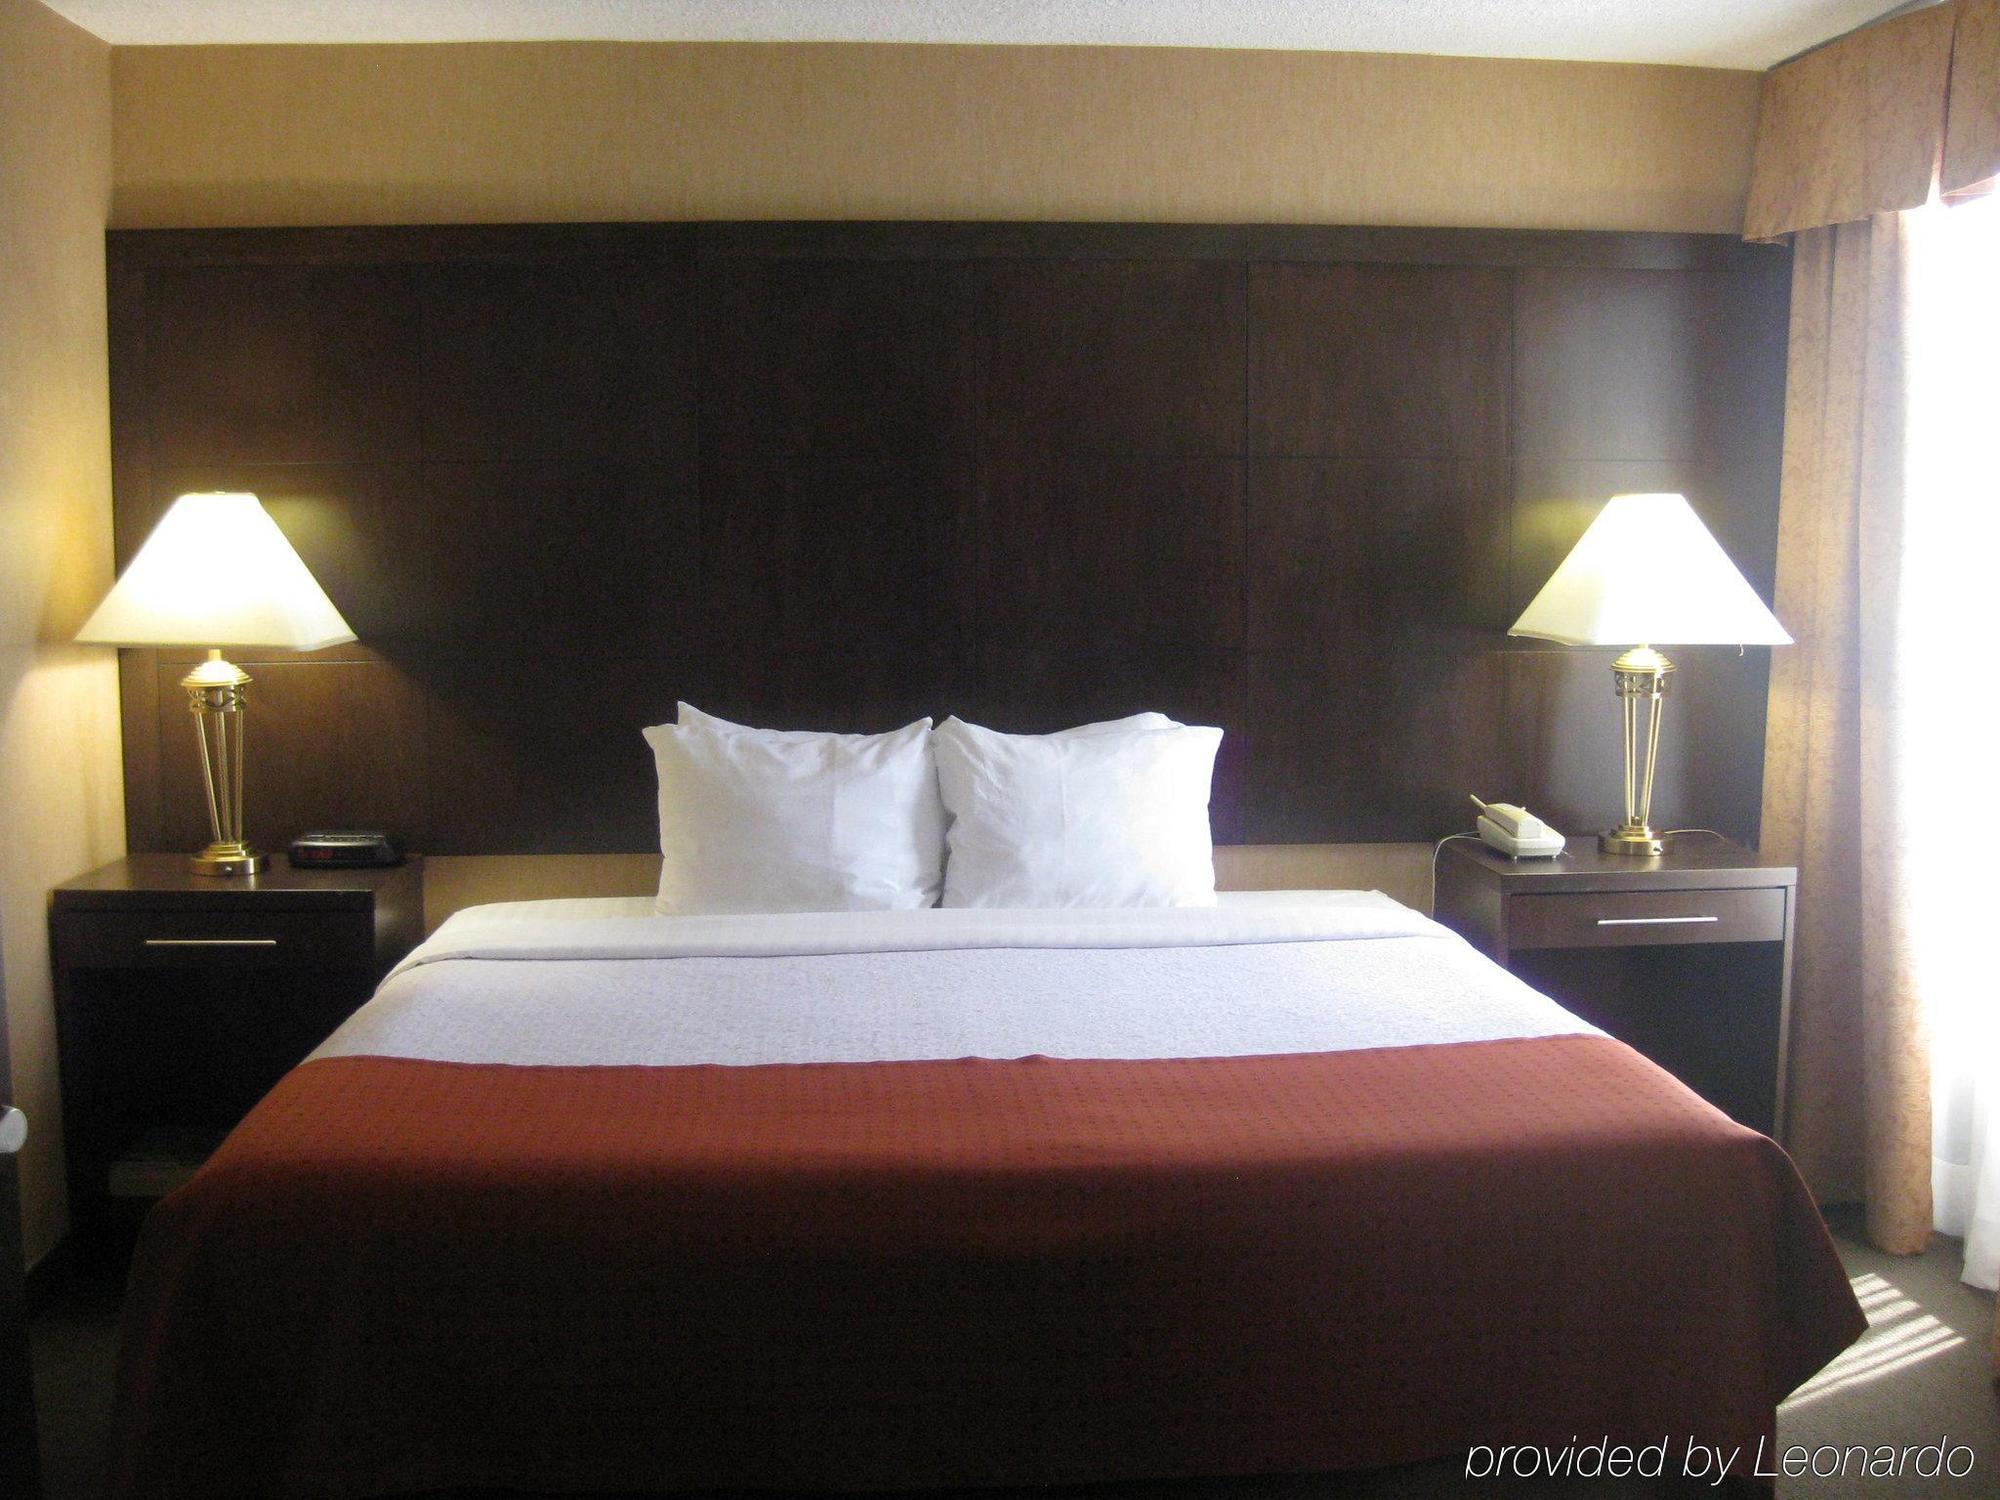 Towneplace Suites By Marriott Toronto Northeast/Markham Room photo